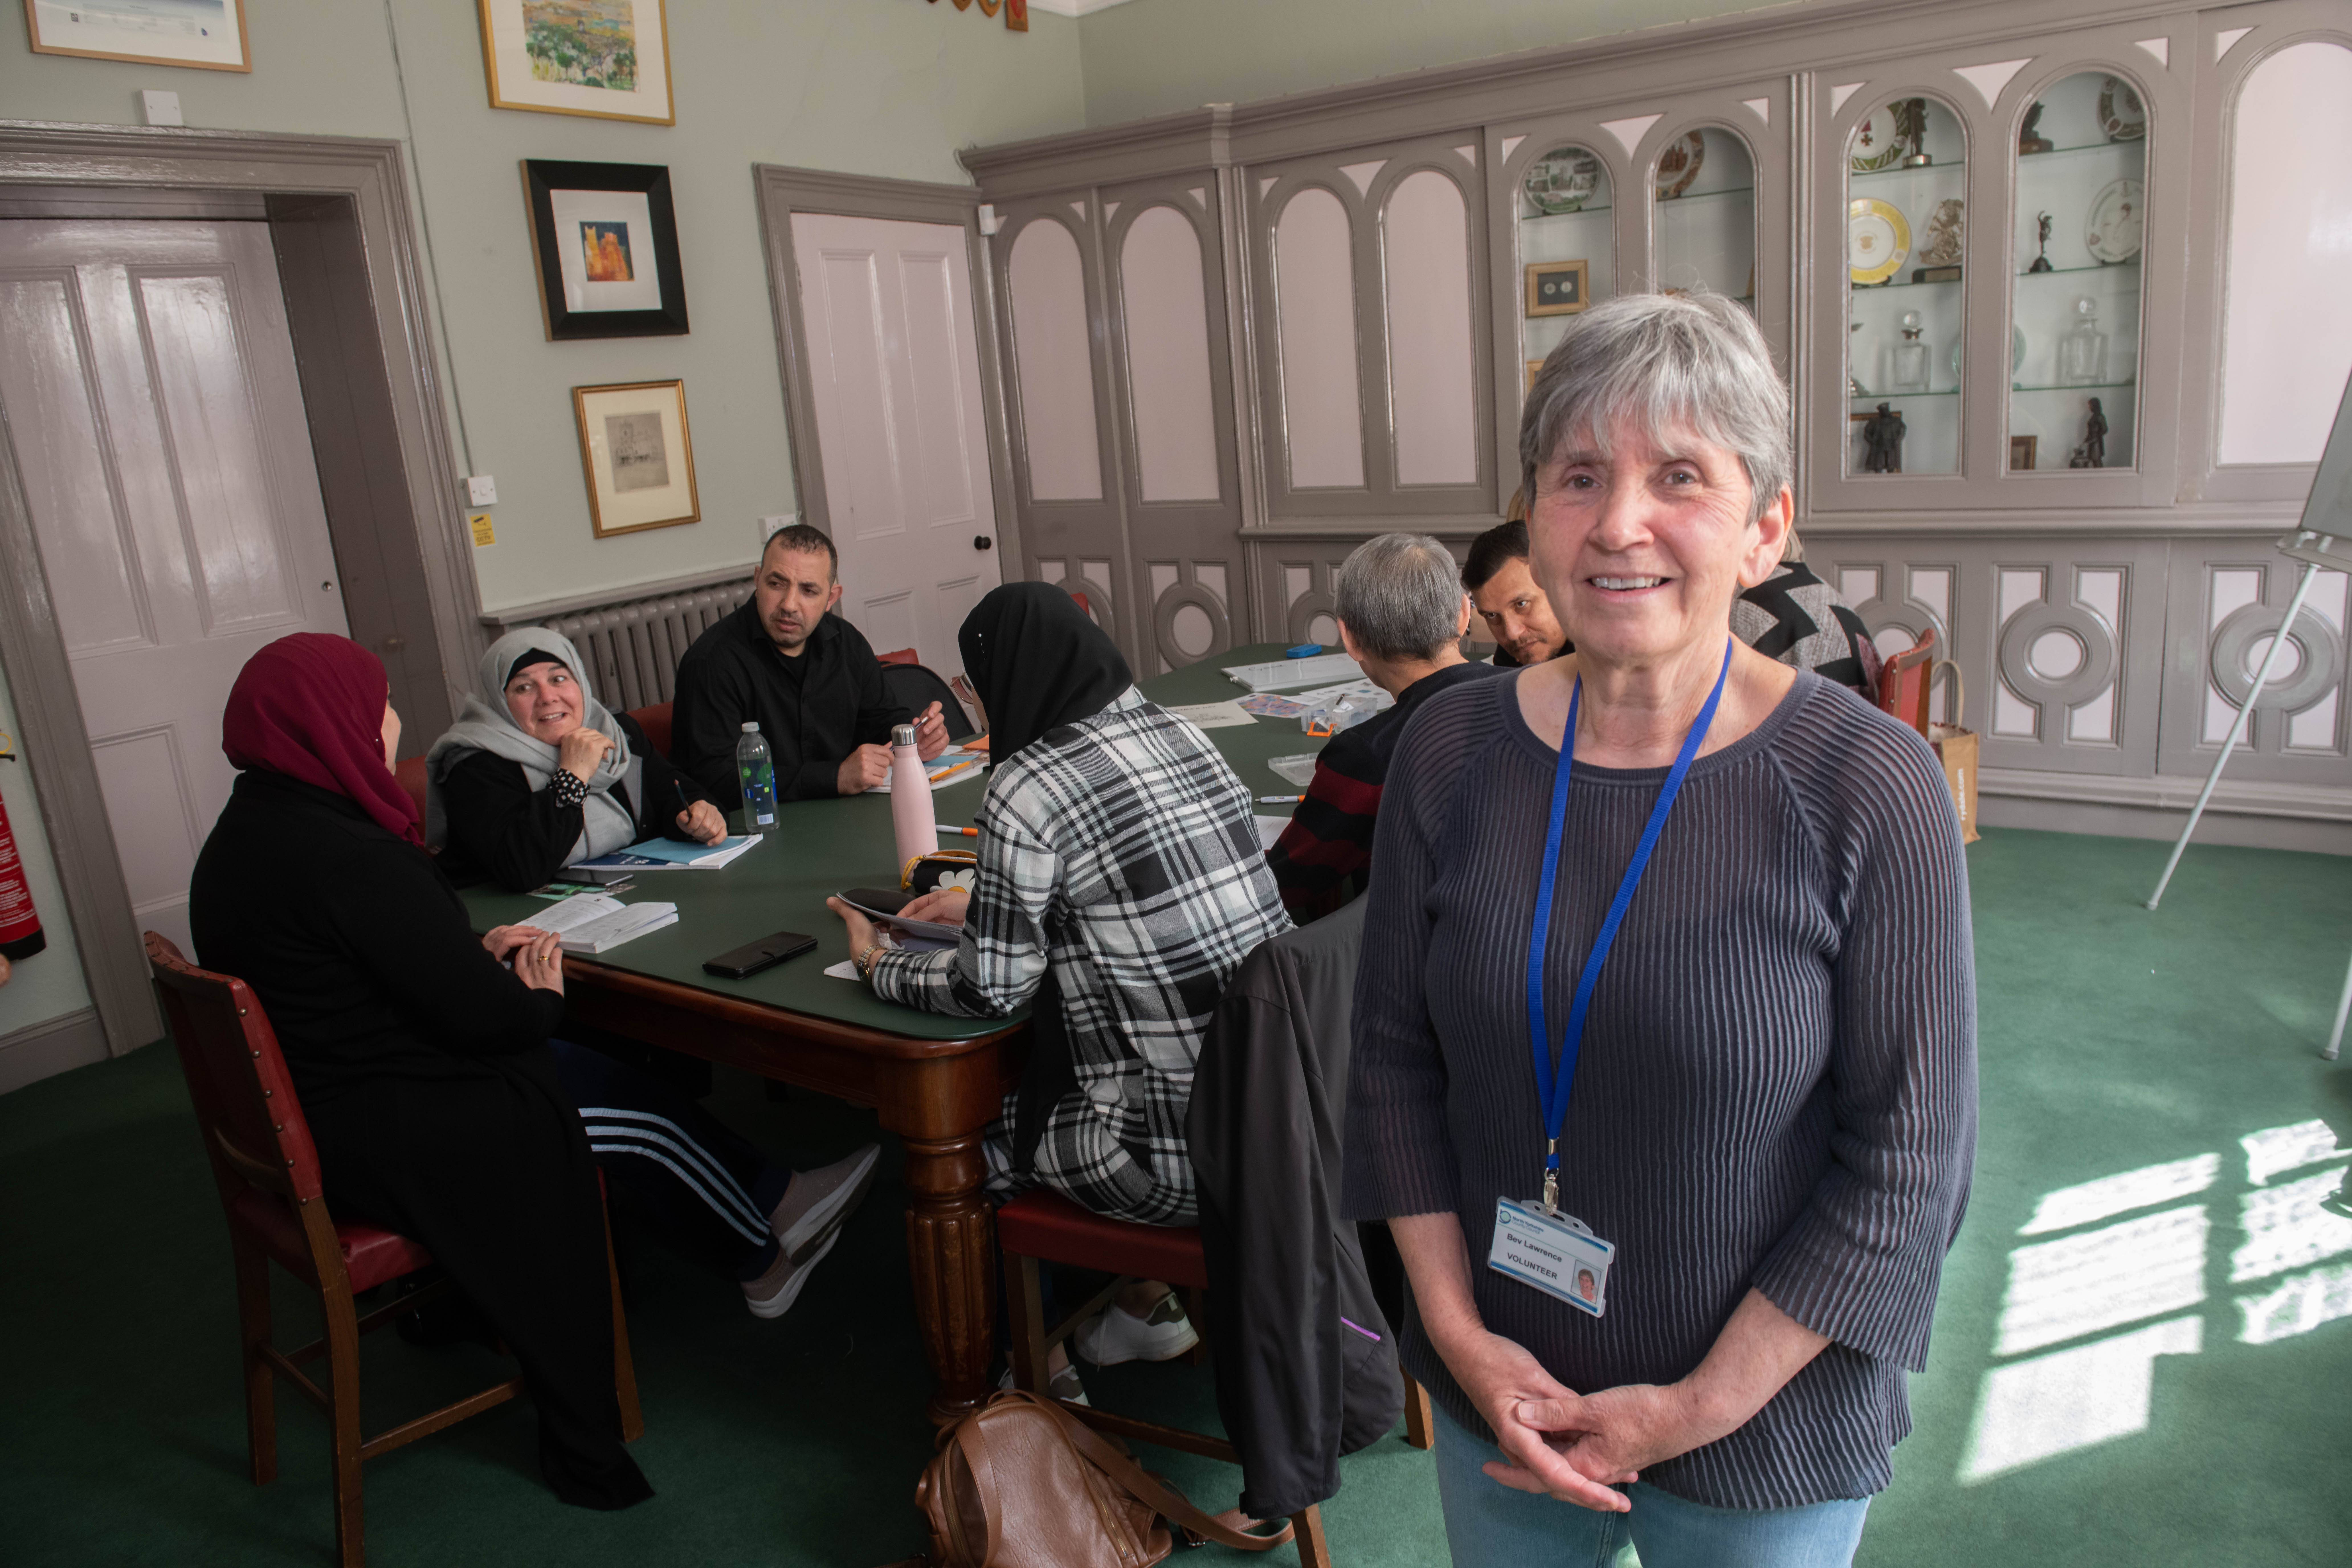 Bev Lawrence is among the thousands of volunteers who have given their time to benefit communities across North Yorkshire. She has been involved with helping to deliver English for speakers of other languages (ESOL) courses for the past six years. 